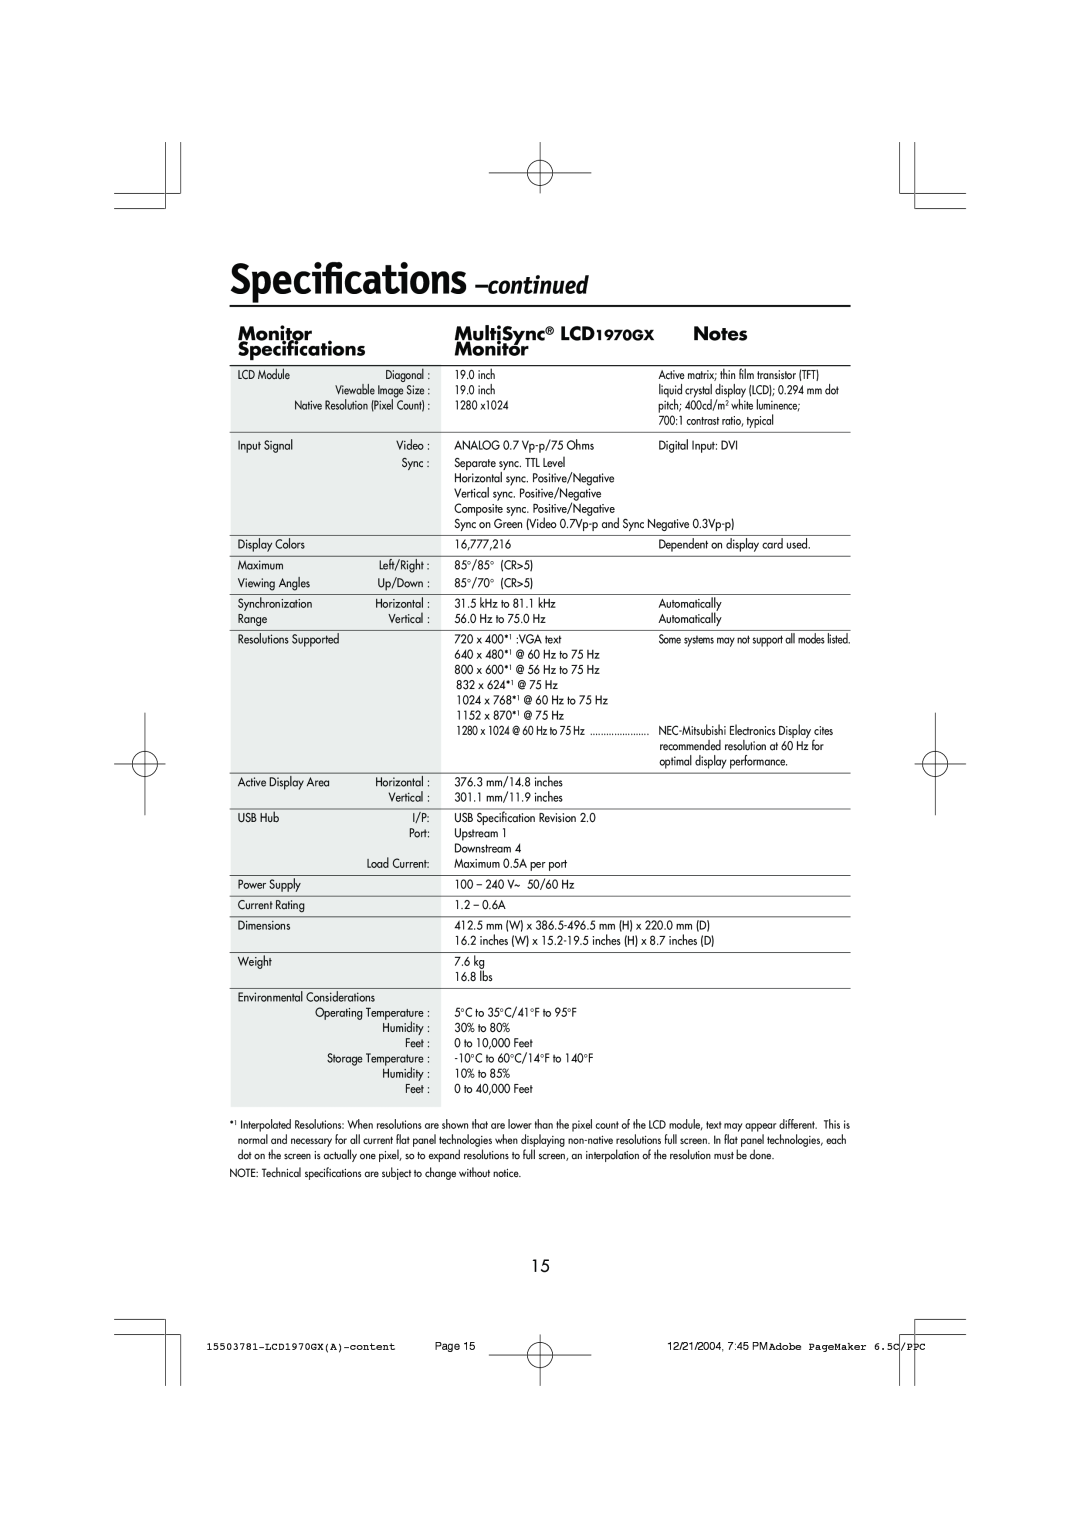 NEC user manual Specifications -continued, Monitor, MultiSync LCD1970GX 